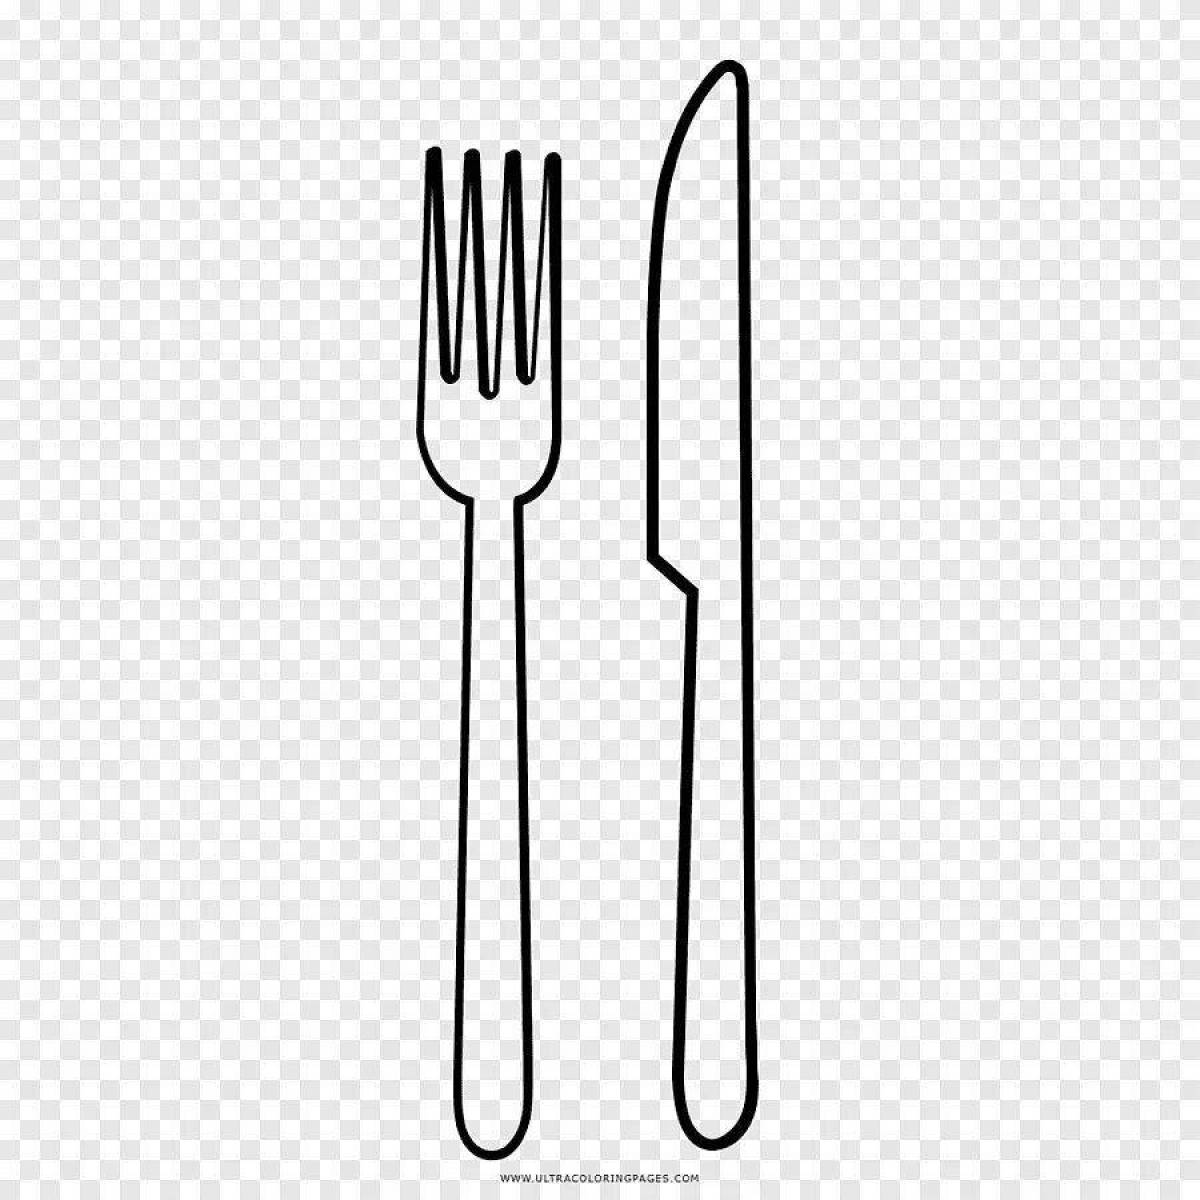 Charming cutlery coloring